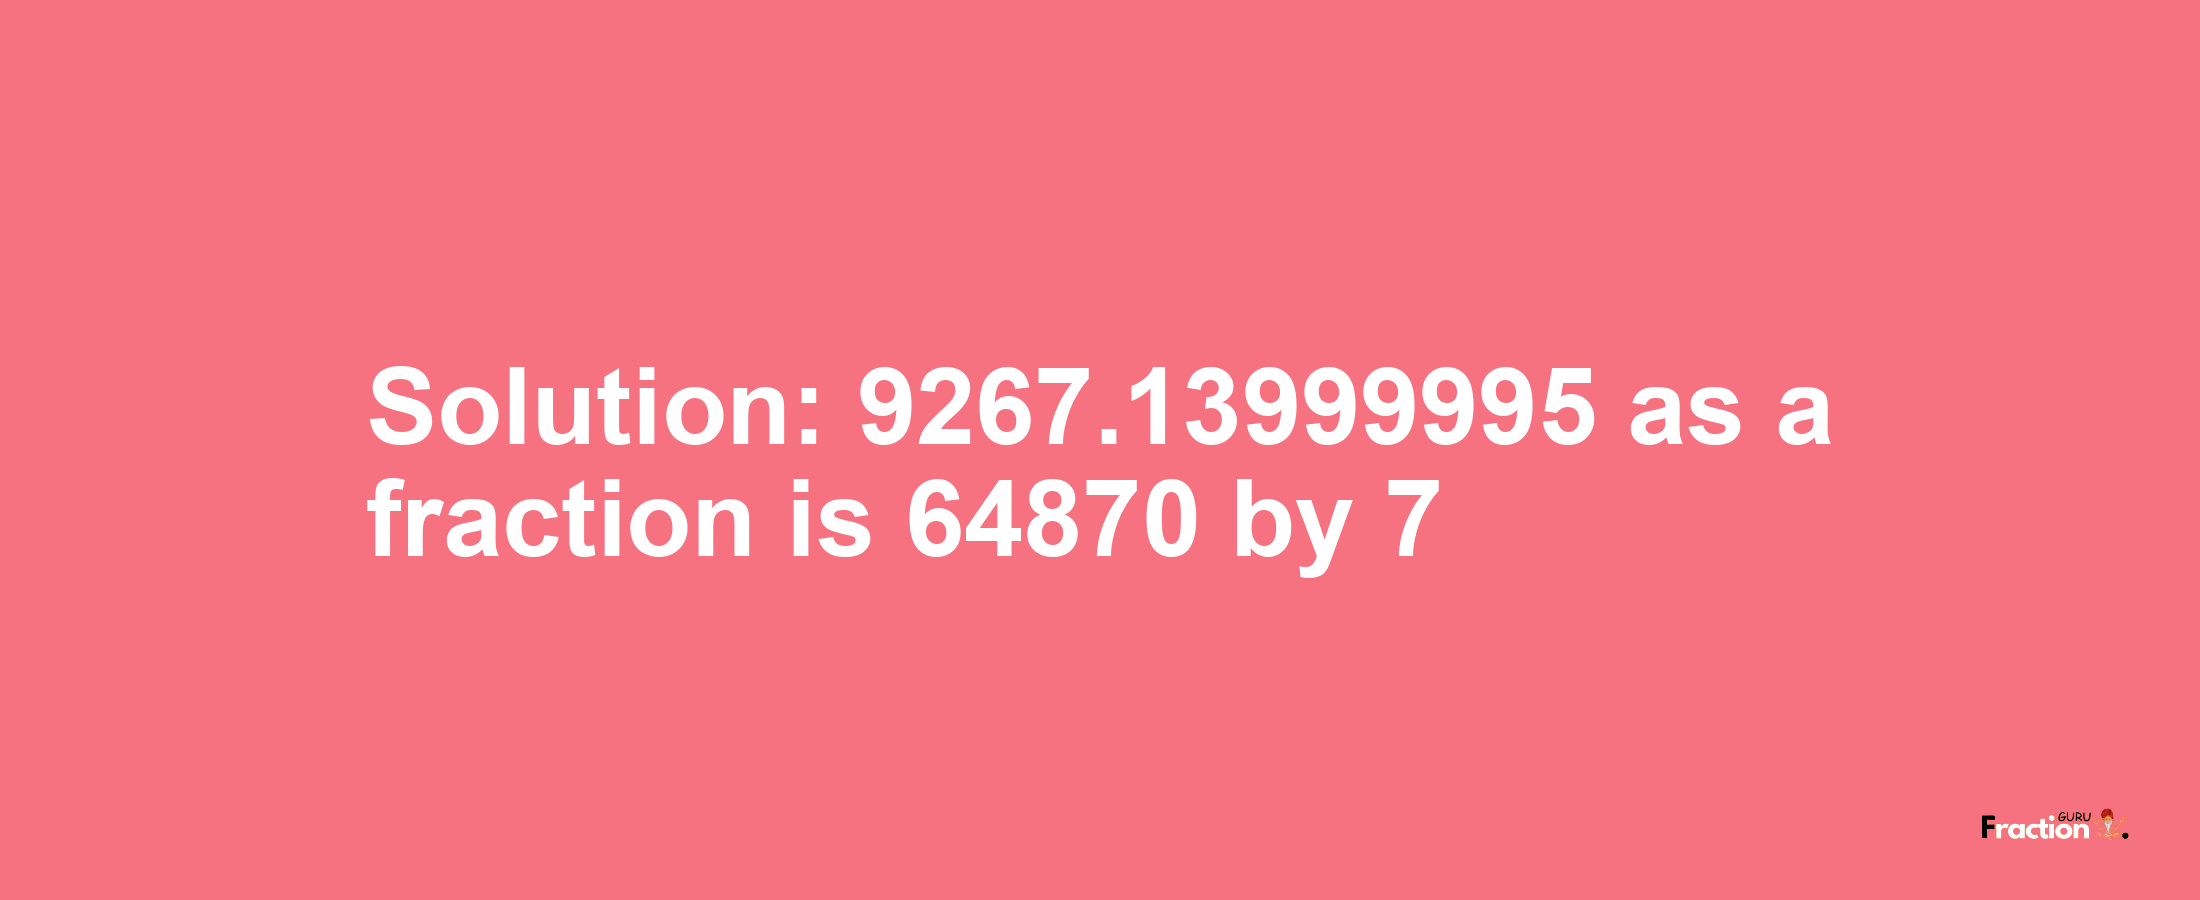 Solution:9267.13999995 as a fraction is 64870/7